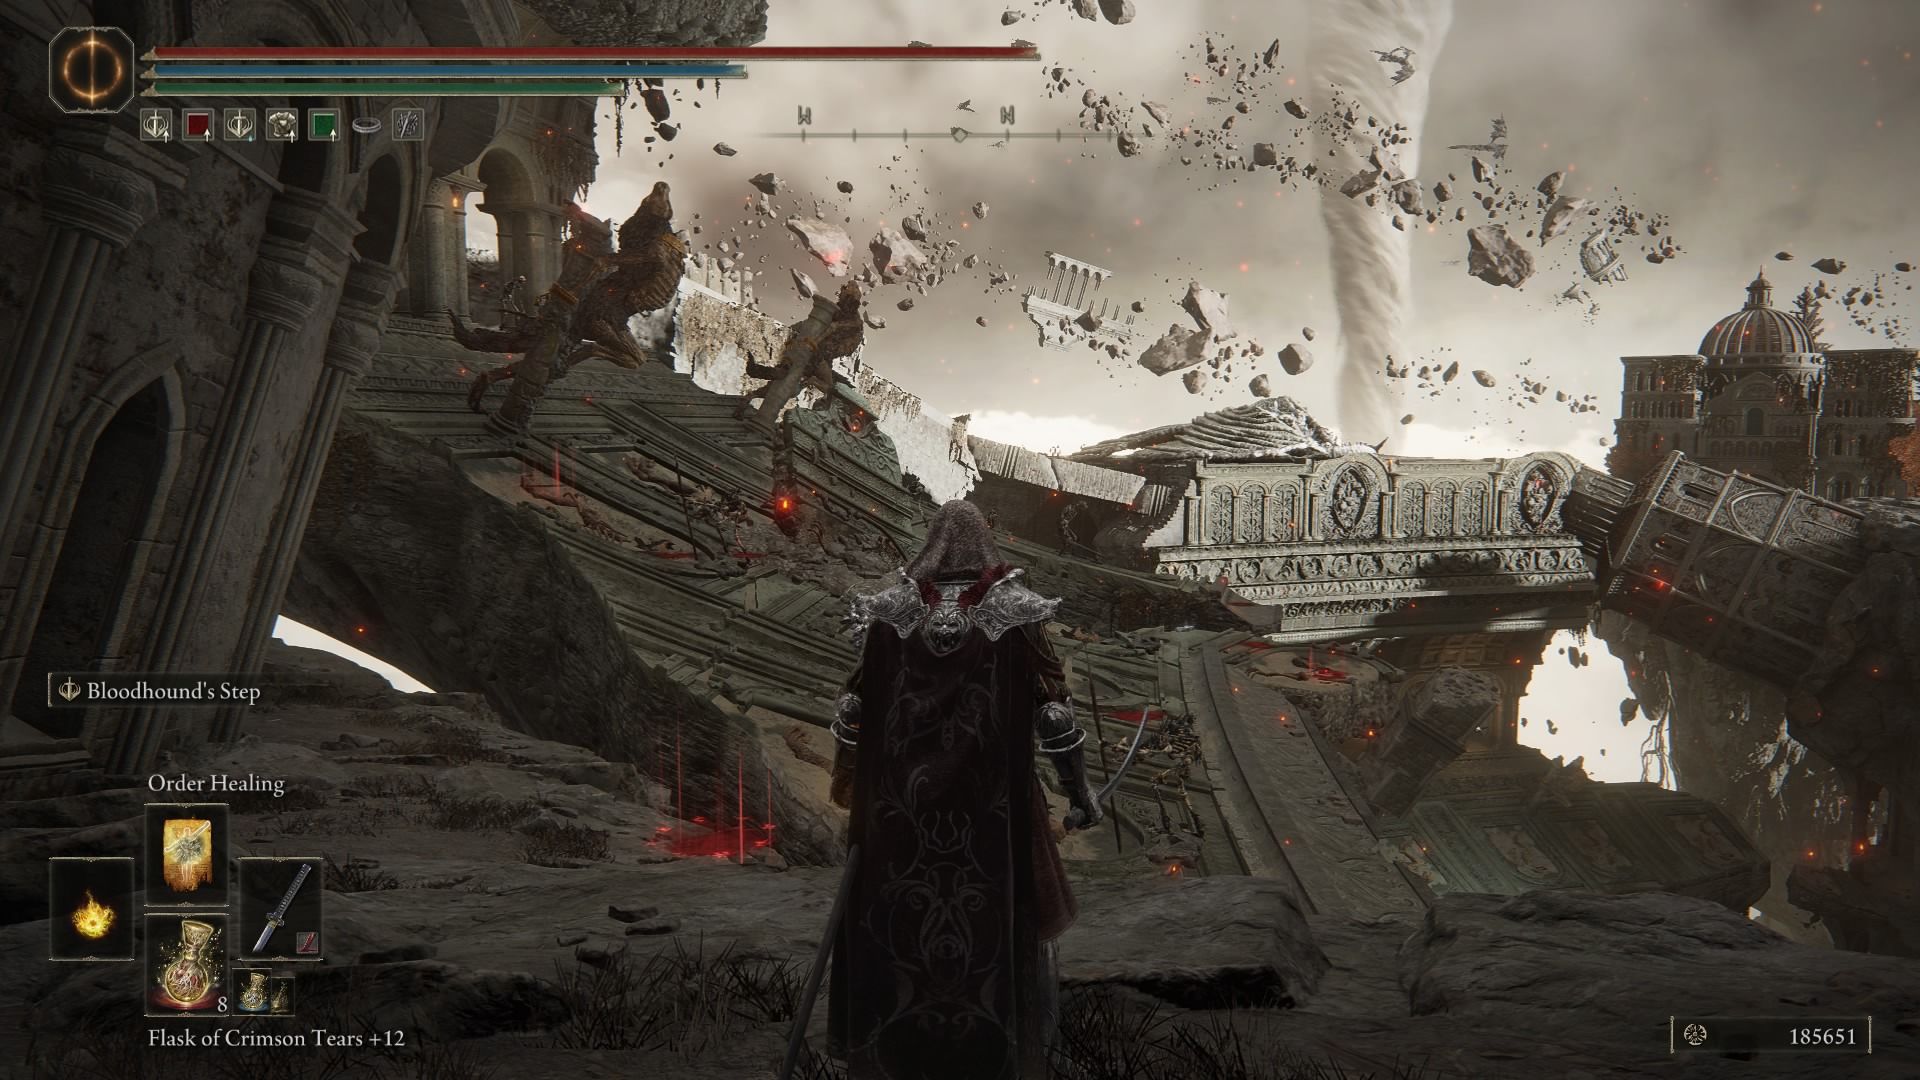 The player approaching the several Skeletons down below.